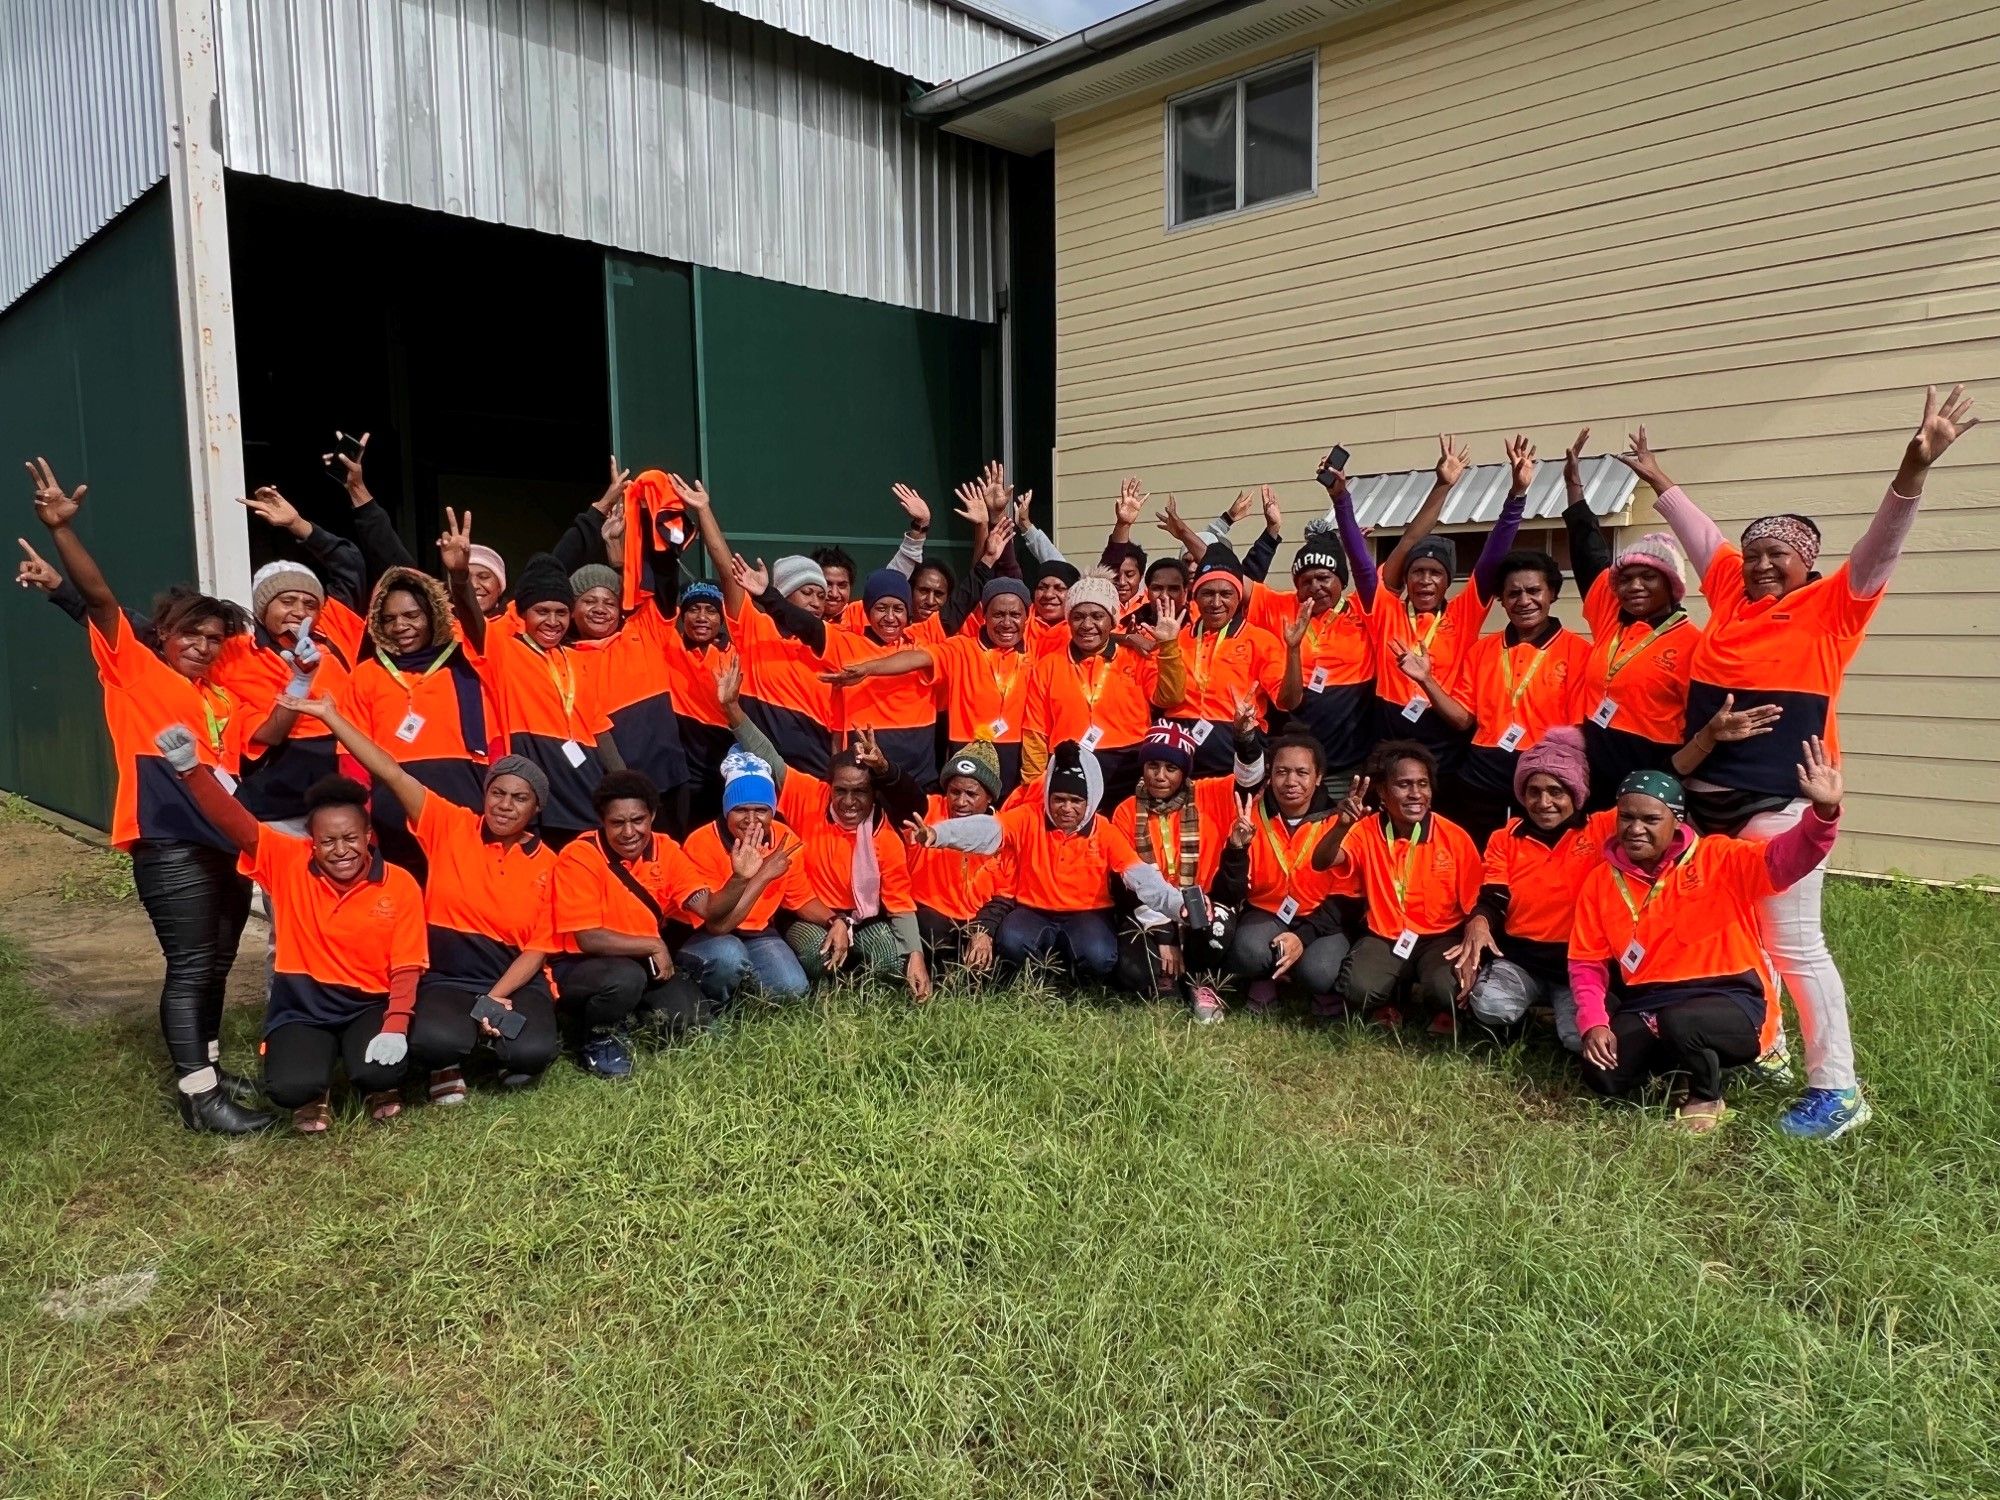 A group of women in workwear smiling and making celebratory gestures at a work site.